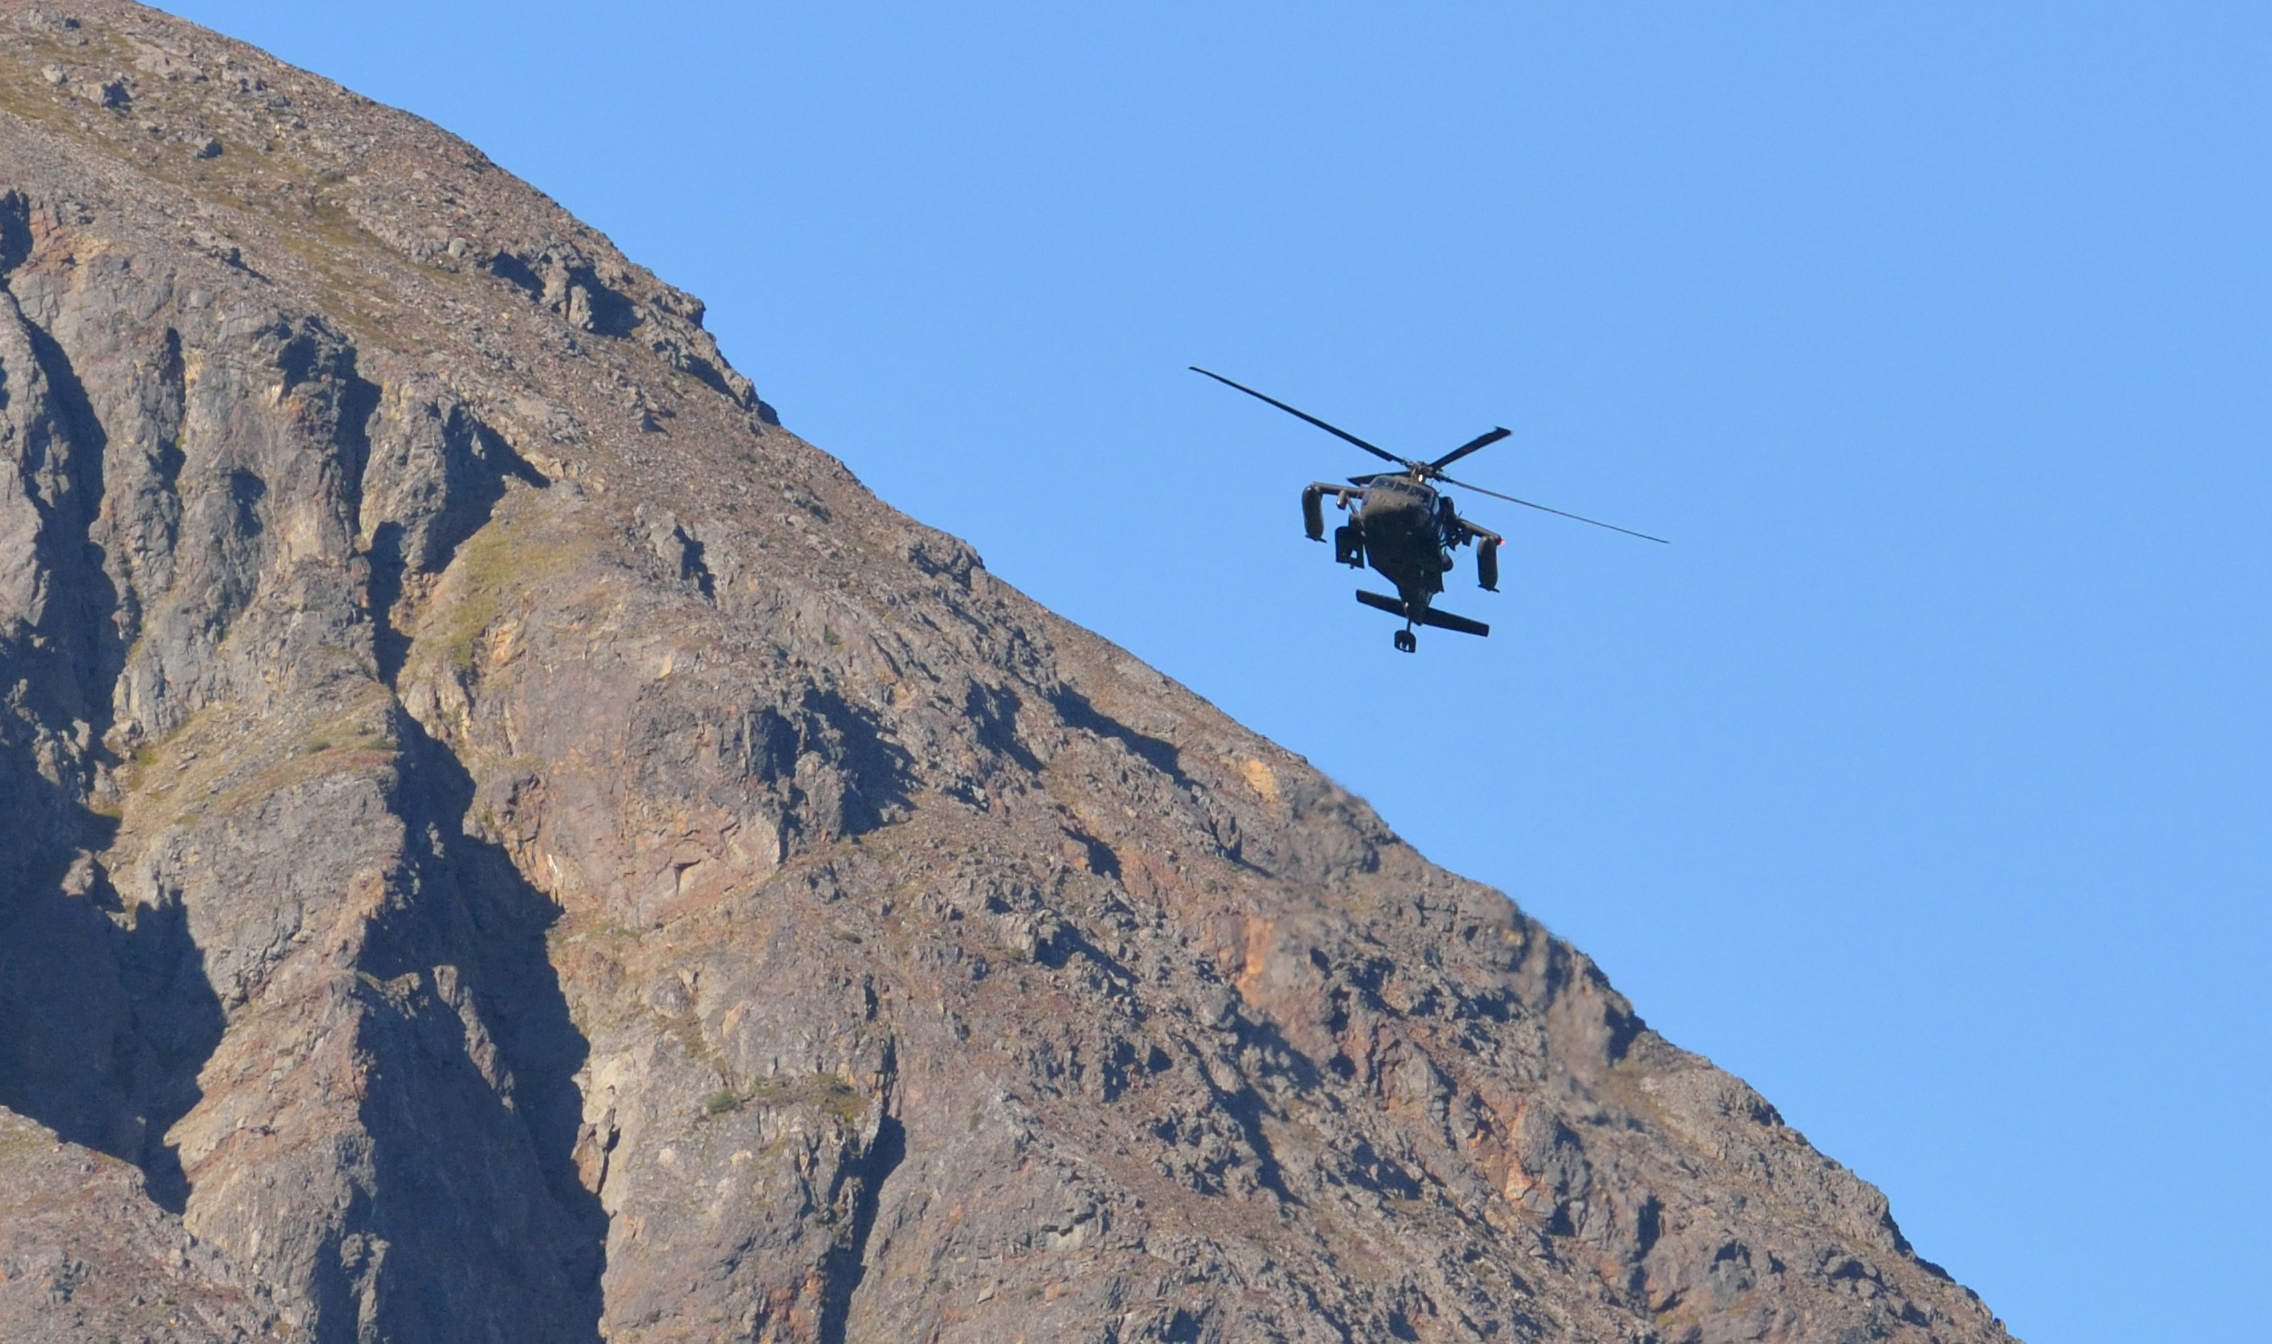 A Blackhawk helicopter monitored Exit Glacier Road, where onlookers eagerly awaited the presidential motorcade.